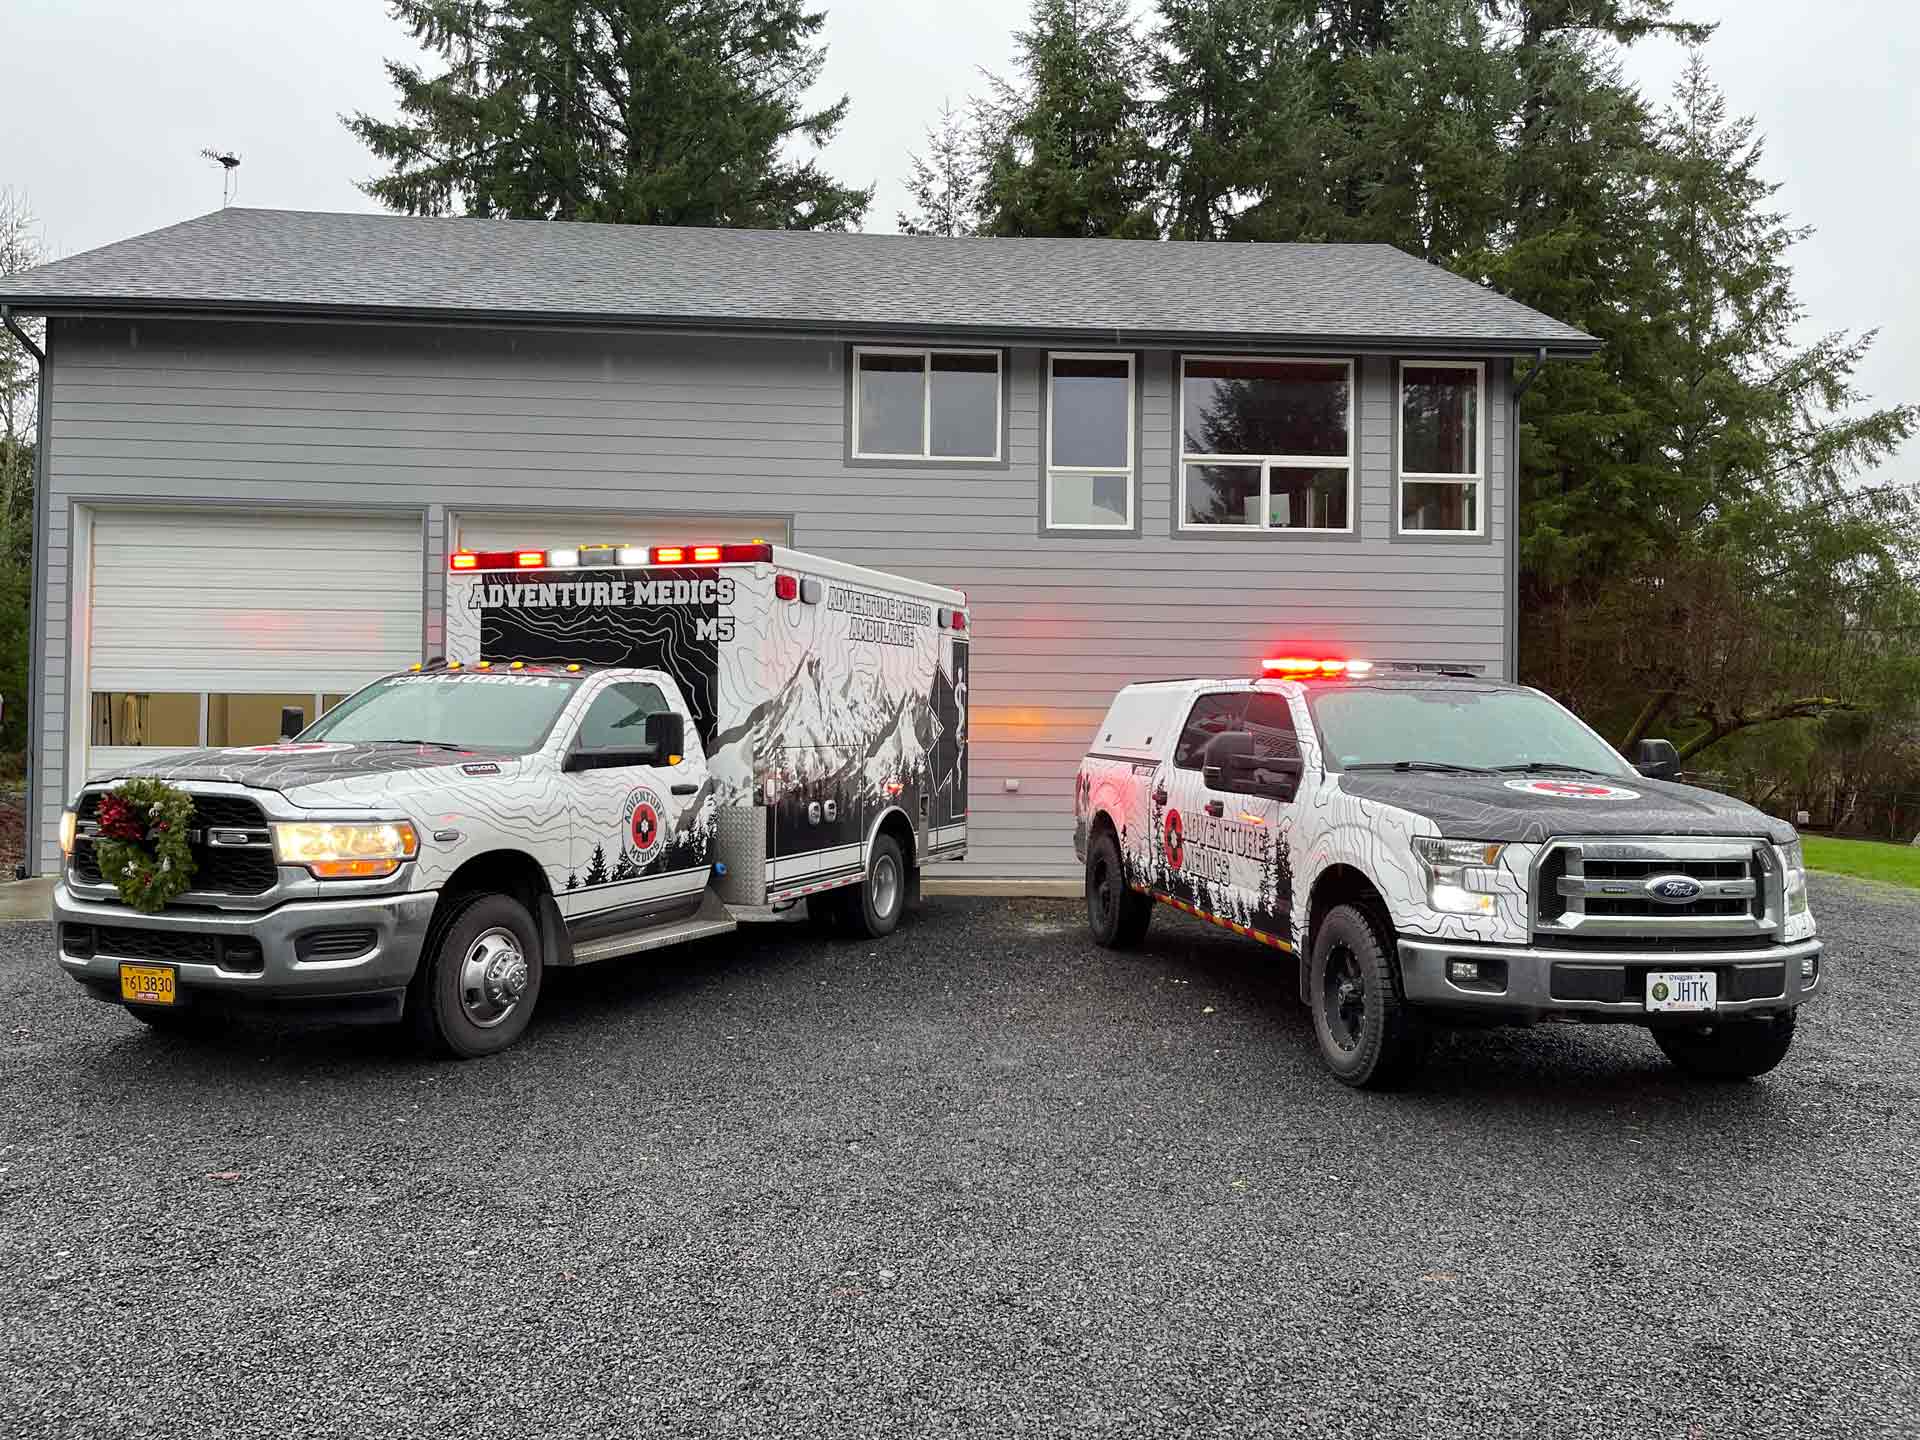 two ambulances parked outside residential home